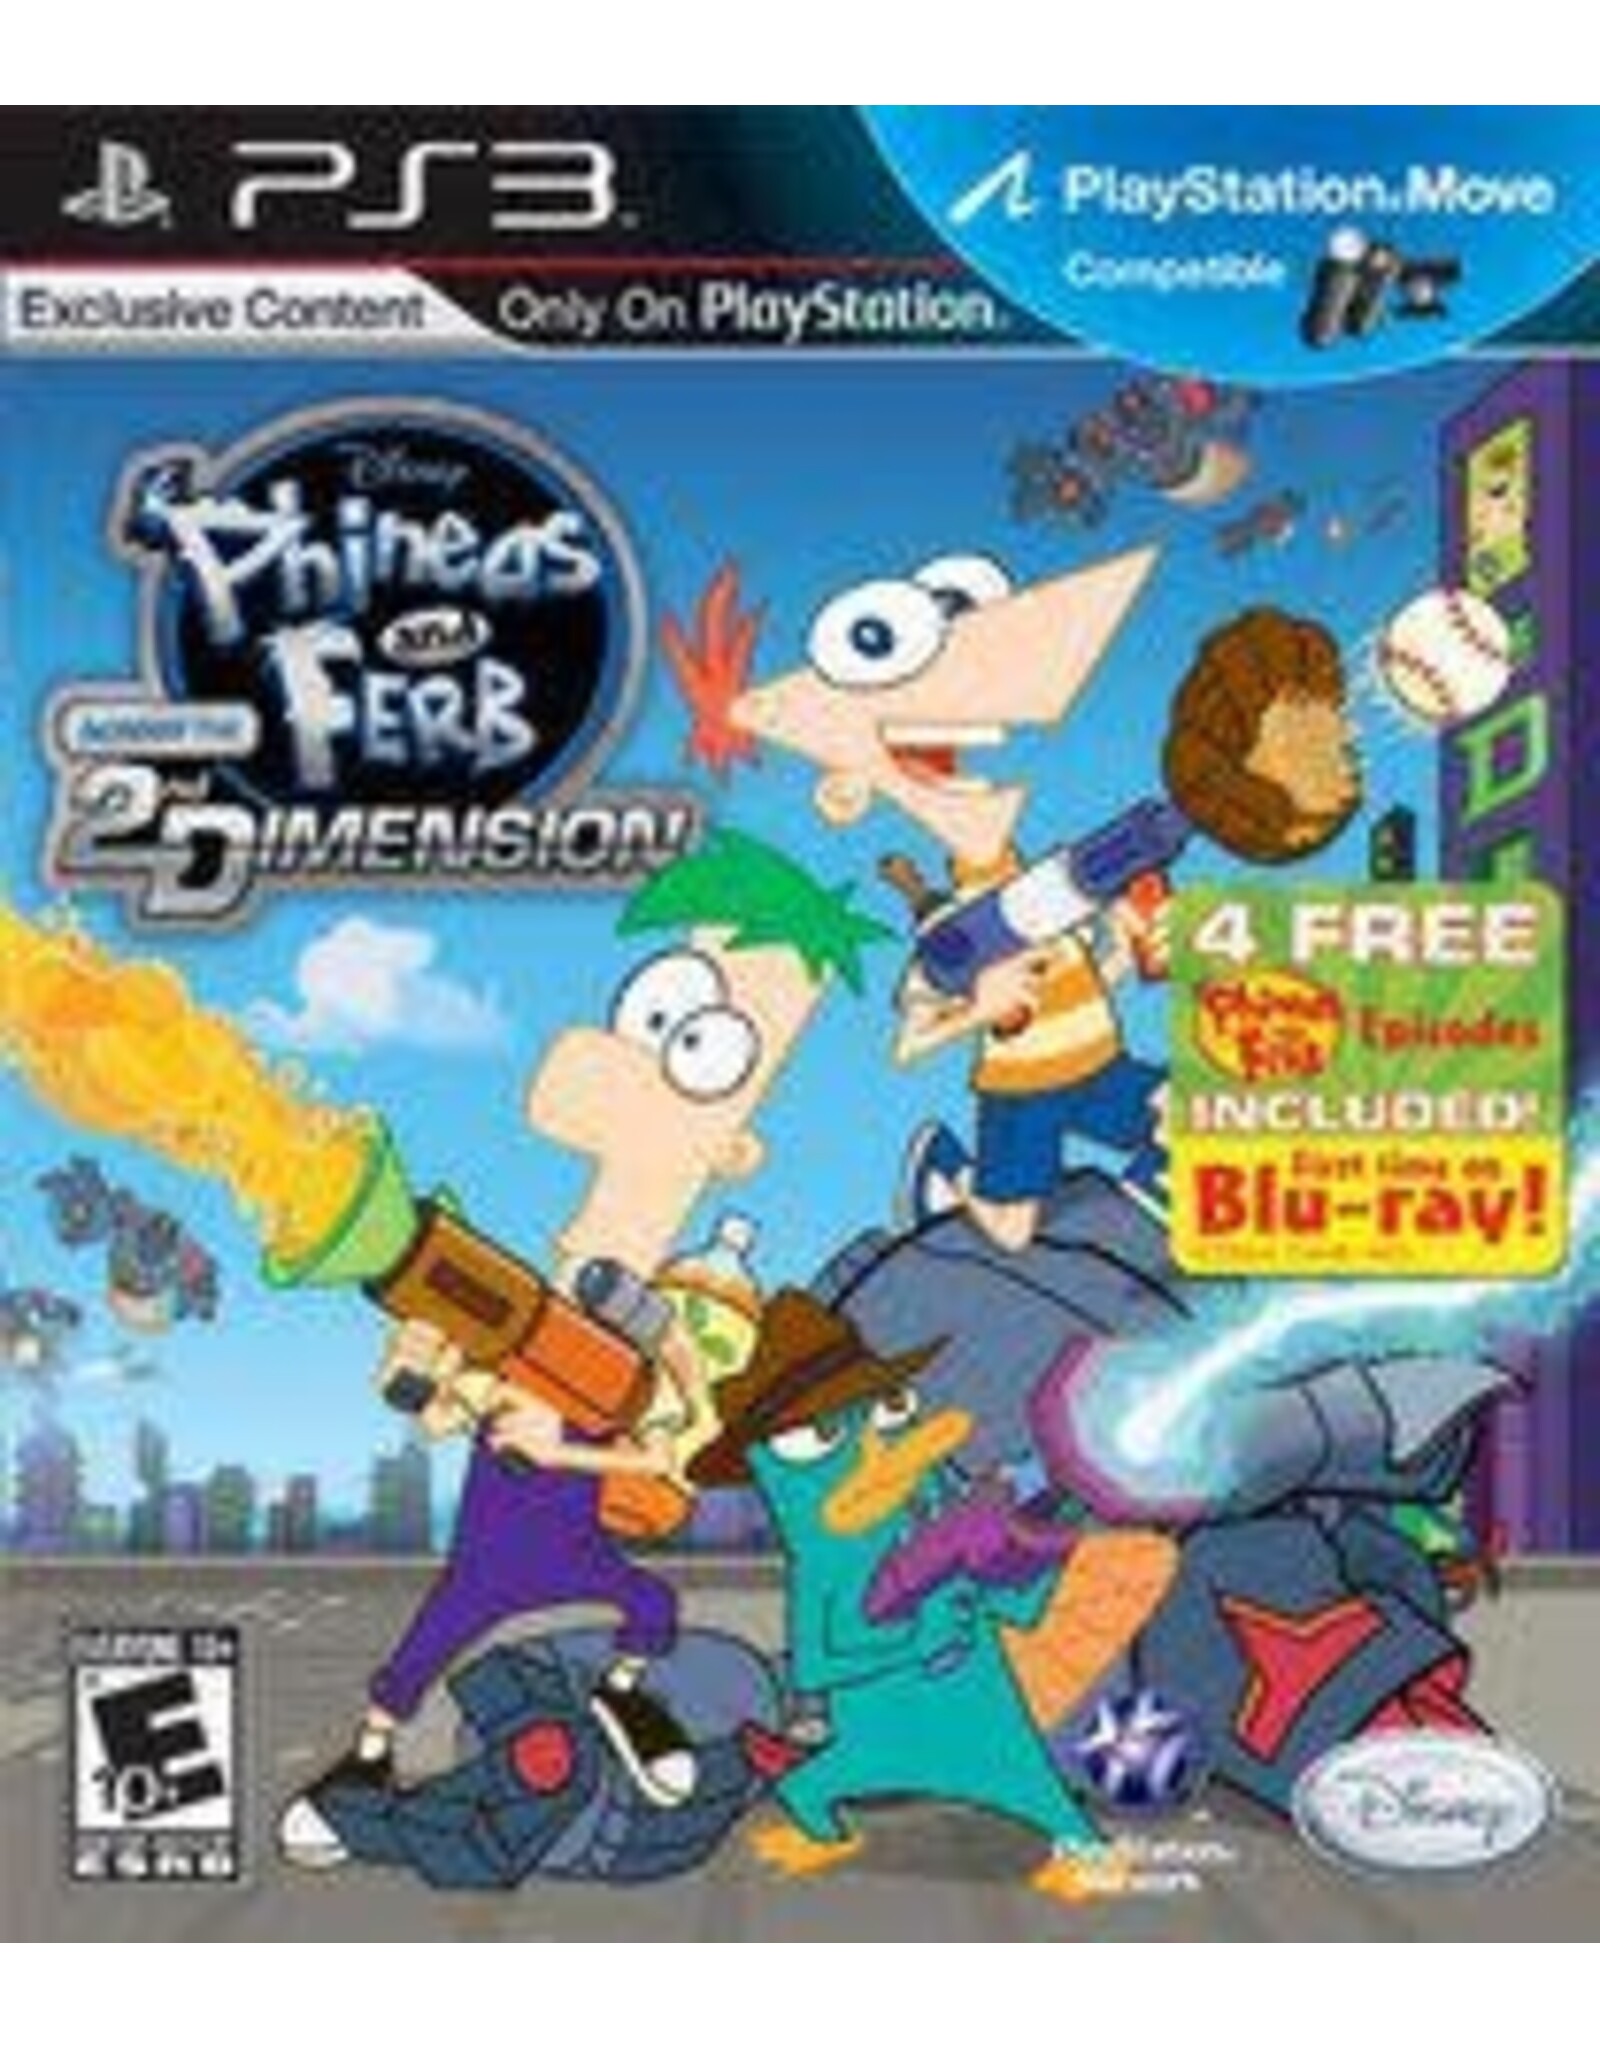 Playstation 3 Phineas and Ferb: Across the 2nd Dimension (CiB)